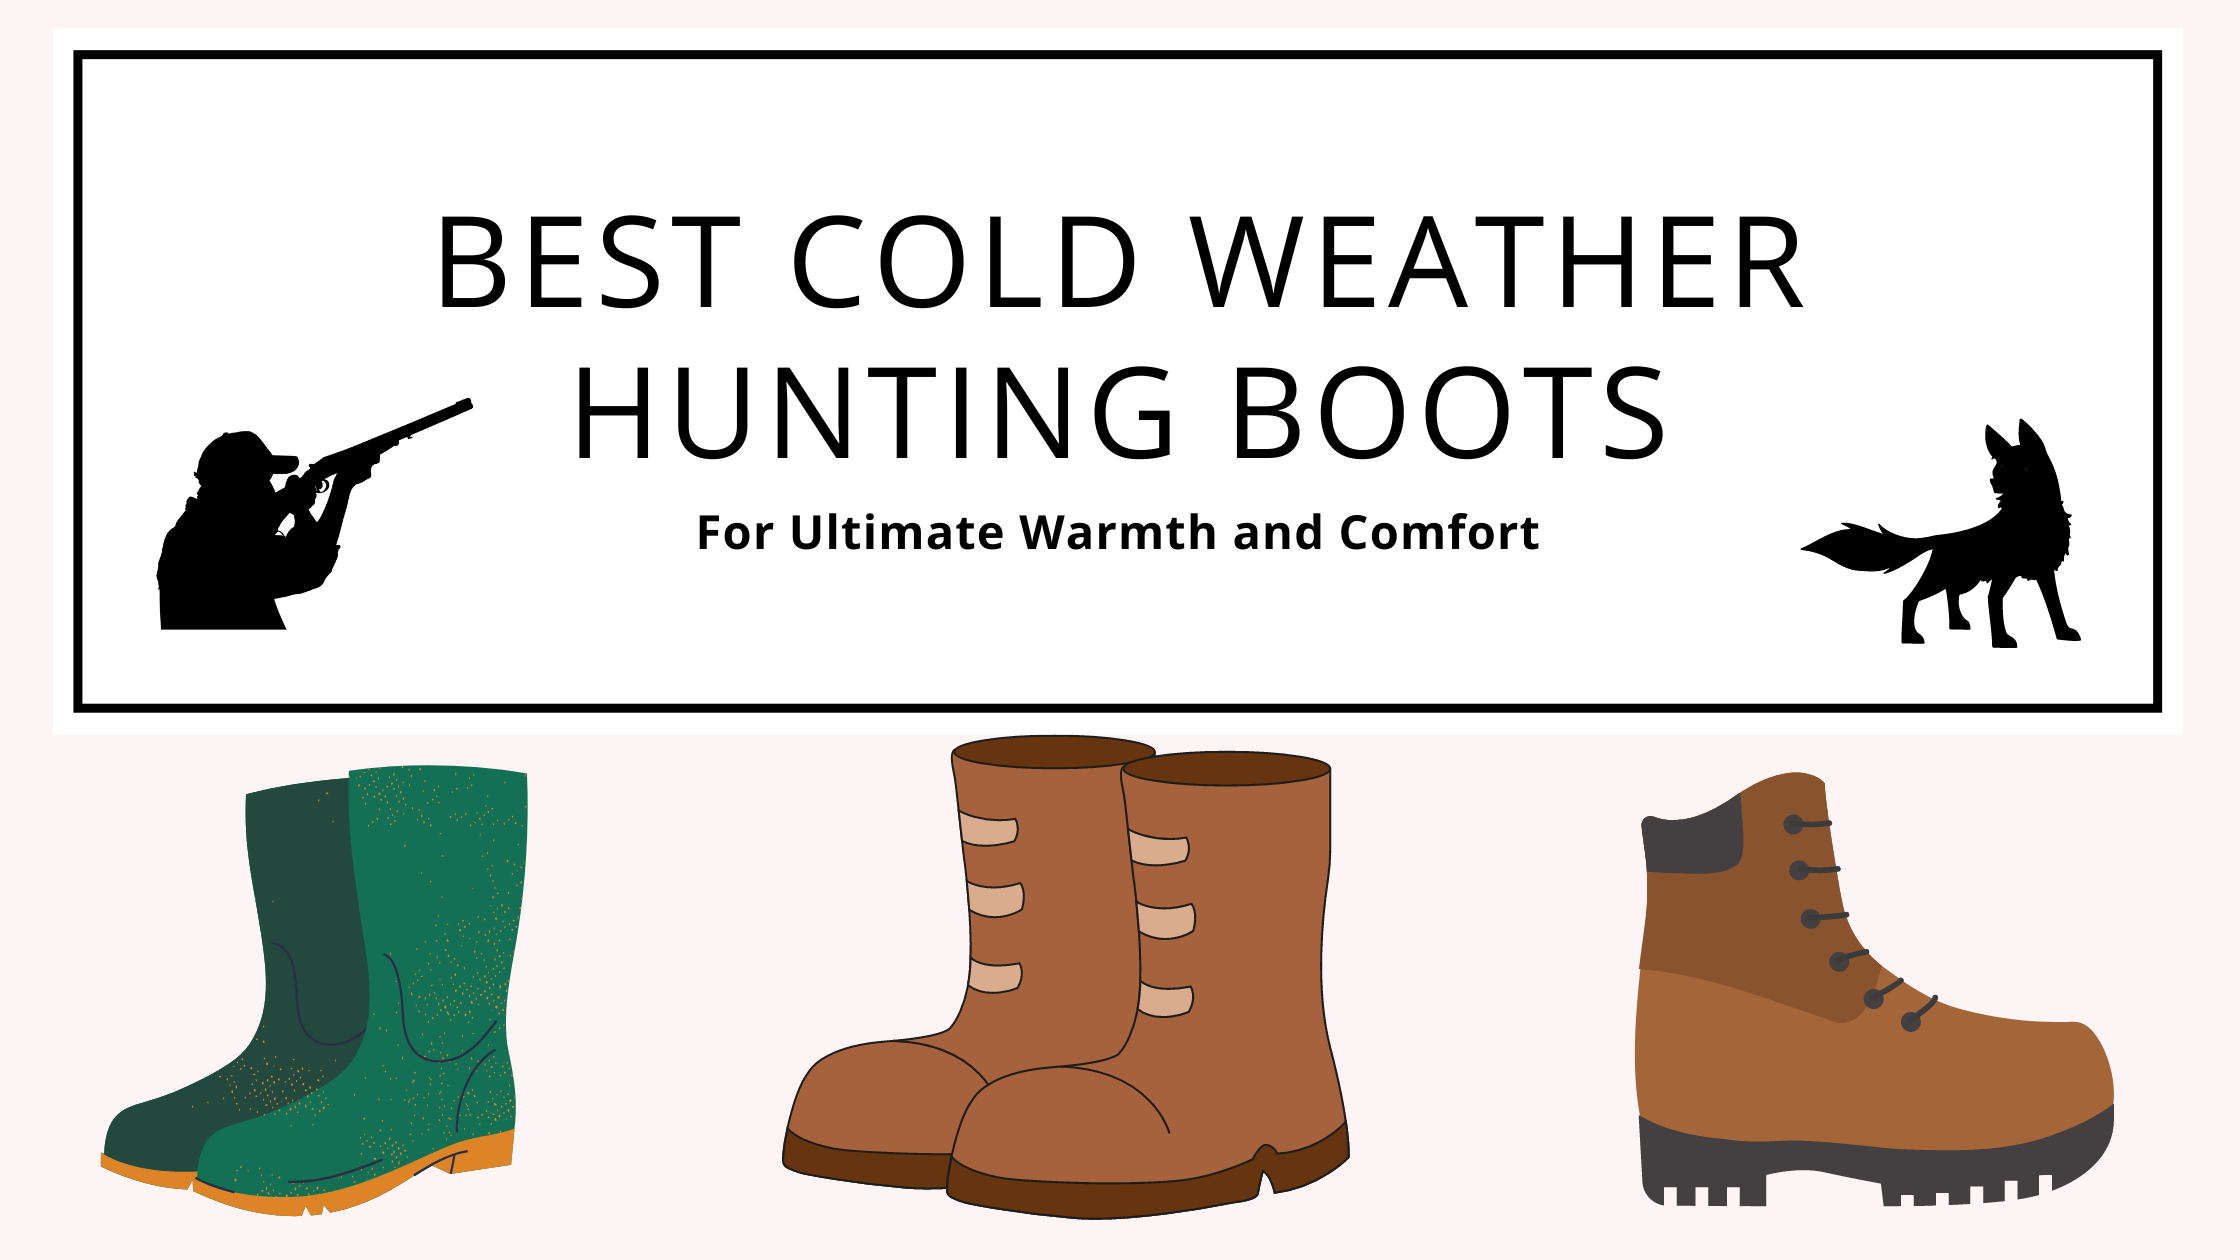 Best Cold Weather Hunting Boots for Ultimate Warmth and Comfort